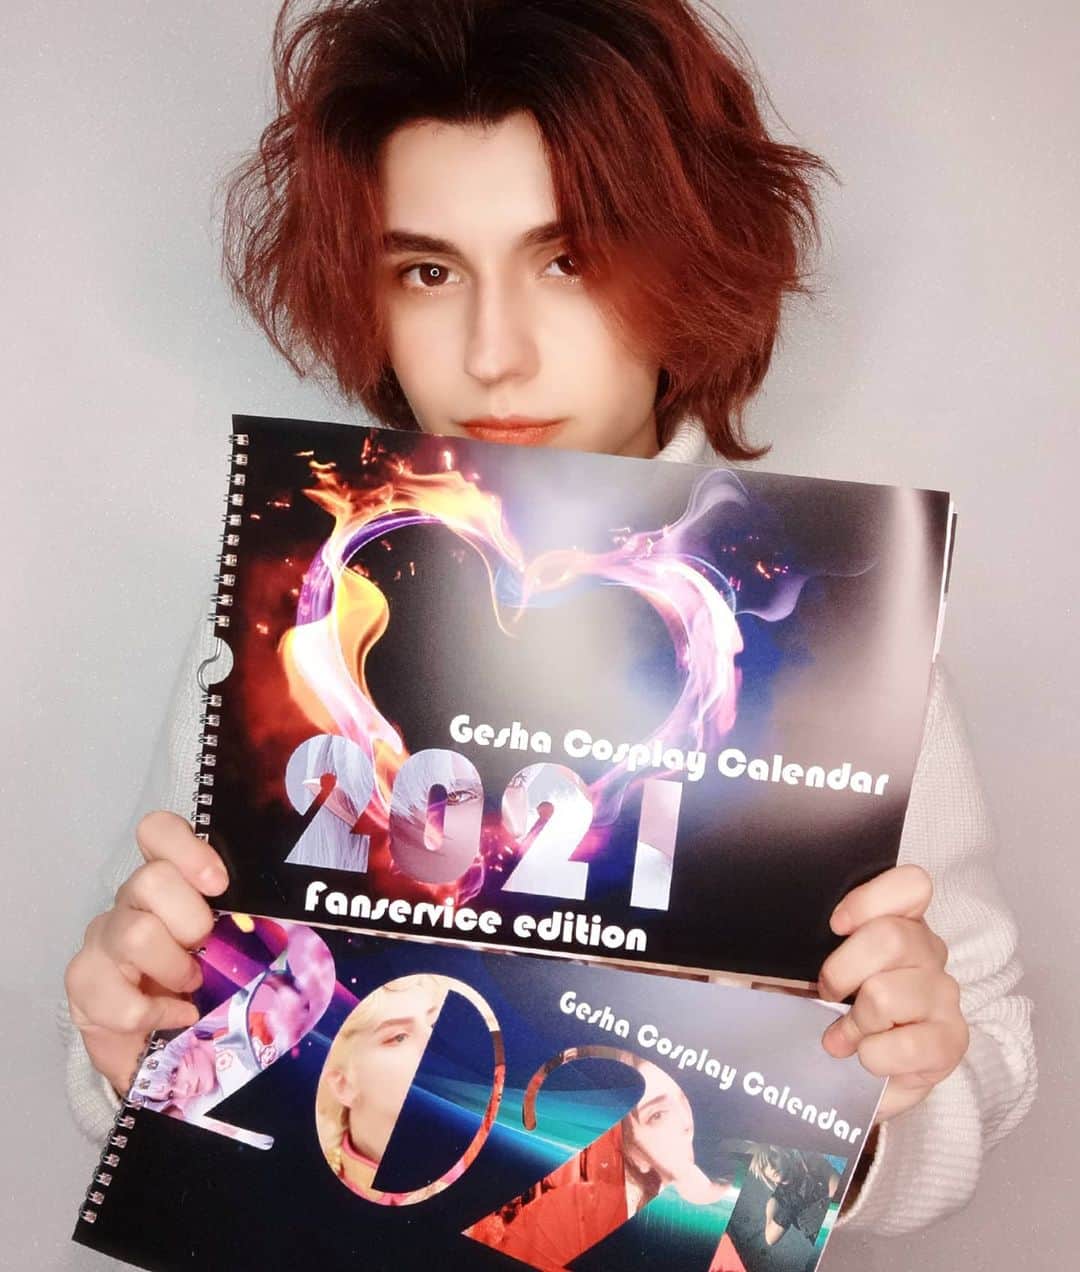 Gesha Petrovichのインスタグラム：「❤️2021 Calendars Avaliable Now❤️ Received  Fanservise one in last week 😏❤️ They are now available for purchase in my Online shop 👇 www.etsy.com/shop/GeshaPrintShop or DM me😊  Happy to see how same ppl order my calendars year by year,its make me happy and motivated 🙏😌 Especially for this year cause im not travel at all and dont feel what actually popular now . Feel myself not famous anymore 😂😂😂😂  But if you would order you can see a lot exclusives photos in both calendars😏❤️ .   Second news im try new A3 size and its looks soo good 😭❤️🙏  #geshacoser #calendar2021」